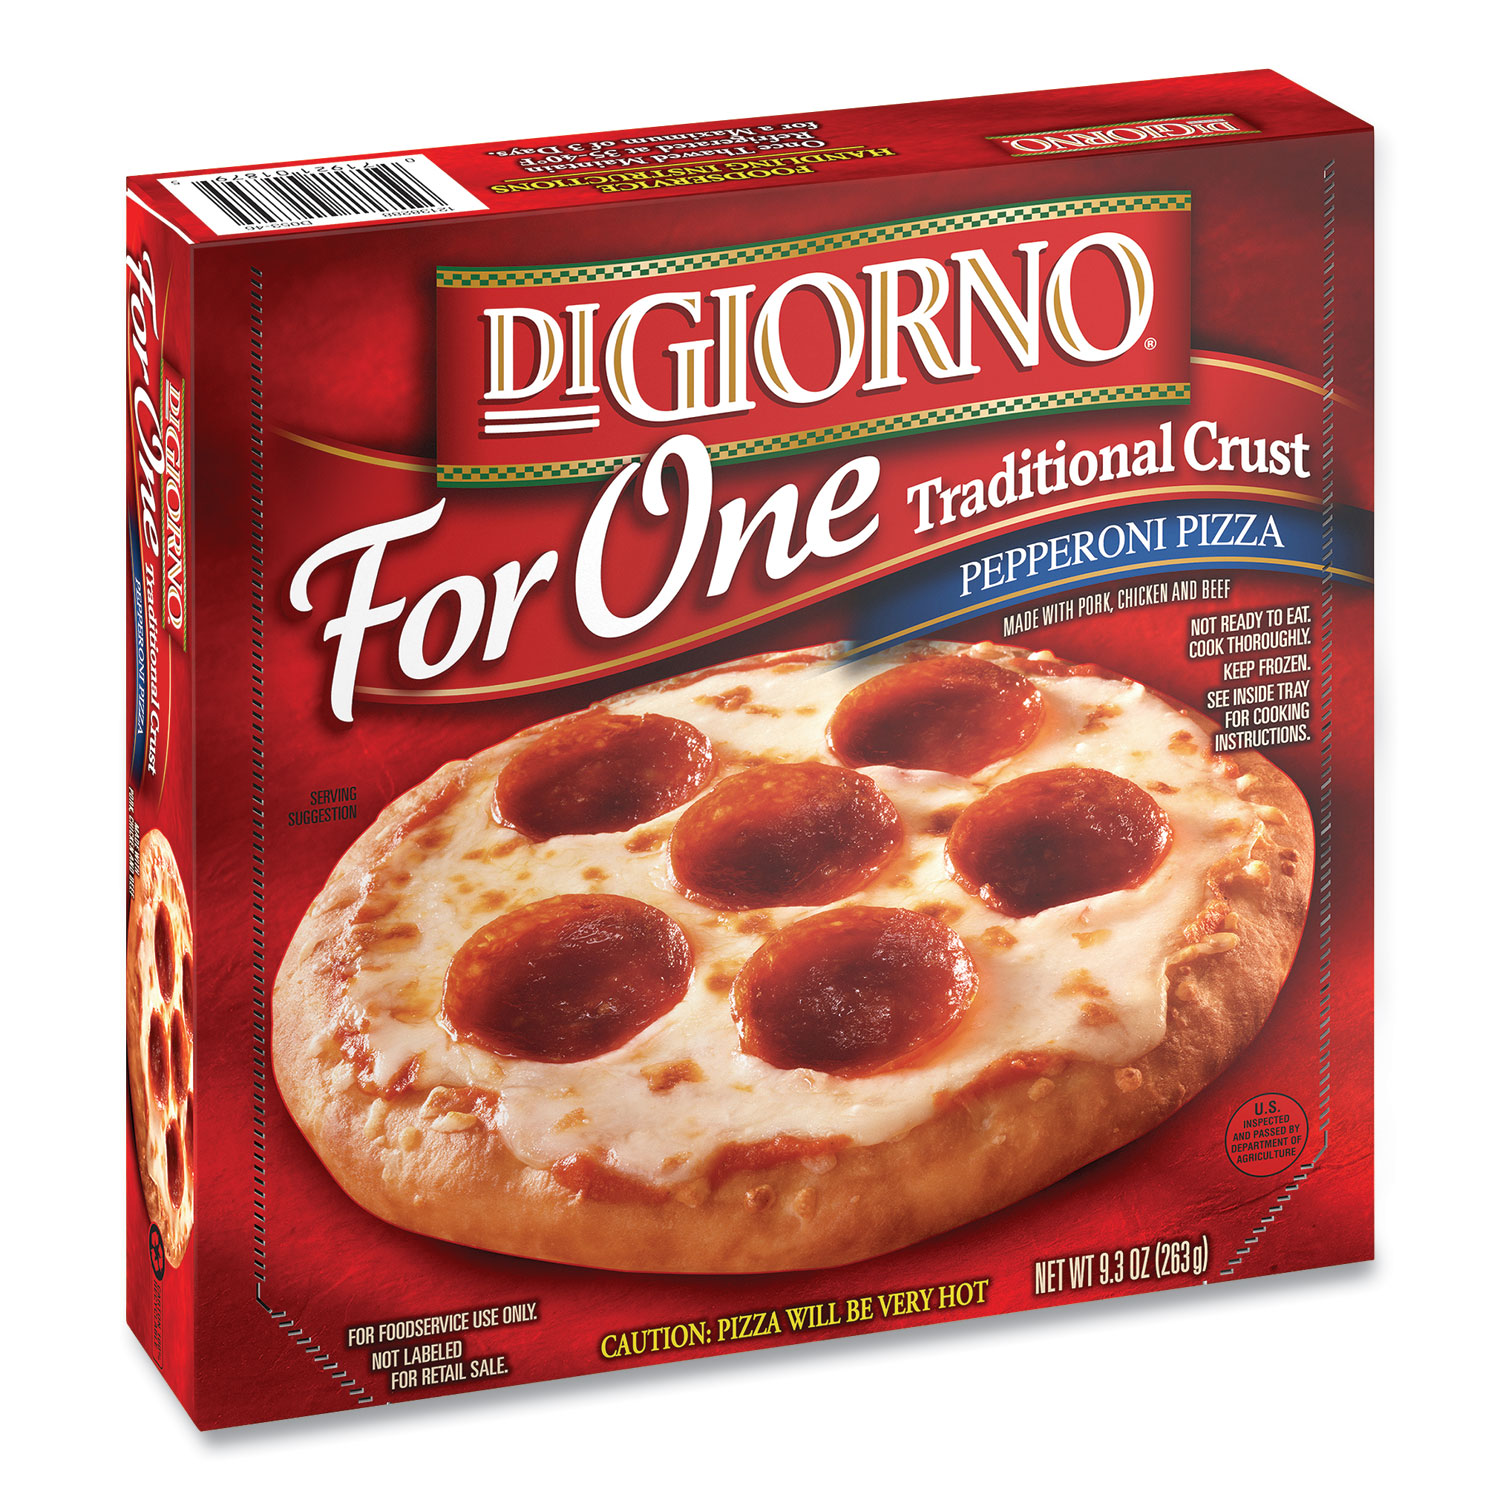  DIGIORNO 18792 For One Single Serve Traditional Crust Pizza, 9.3 oz, Pepperoni, 3/Pack, Free Delivery in 1-4 Business Days (GRR90300119) 